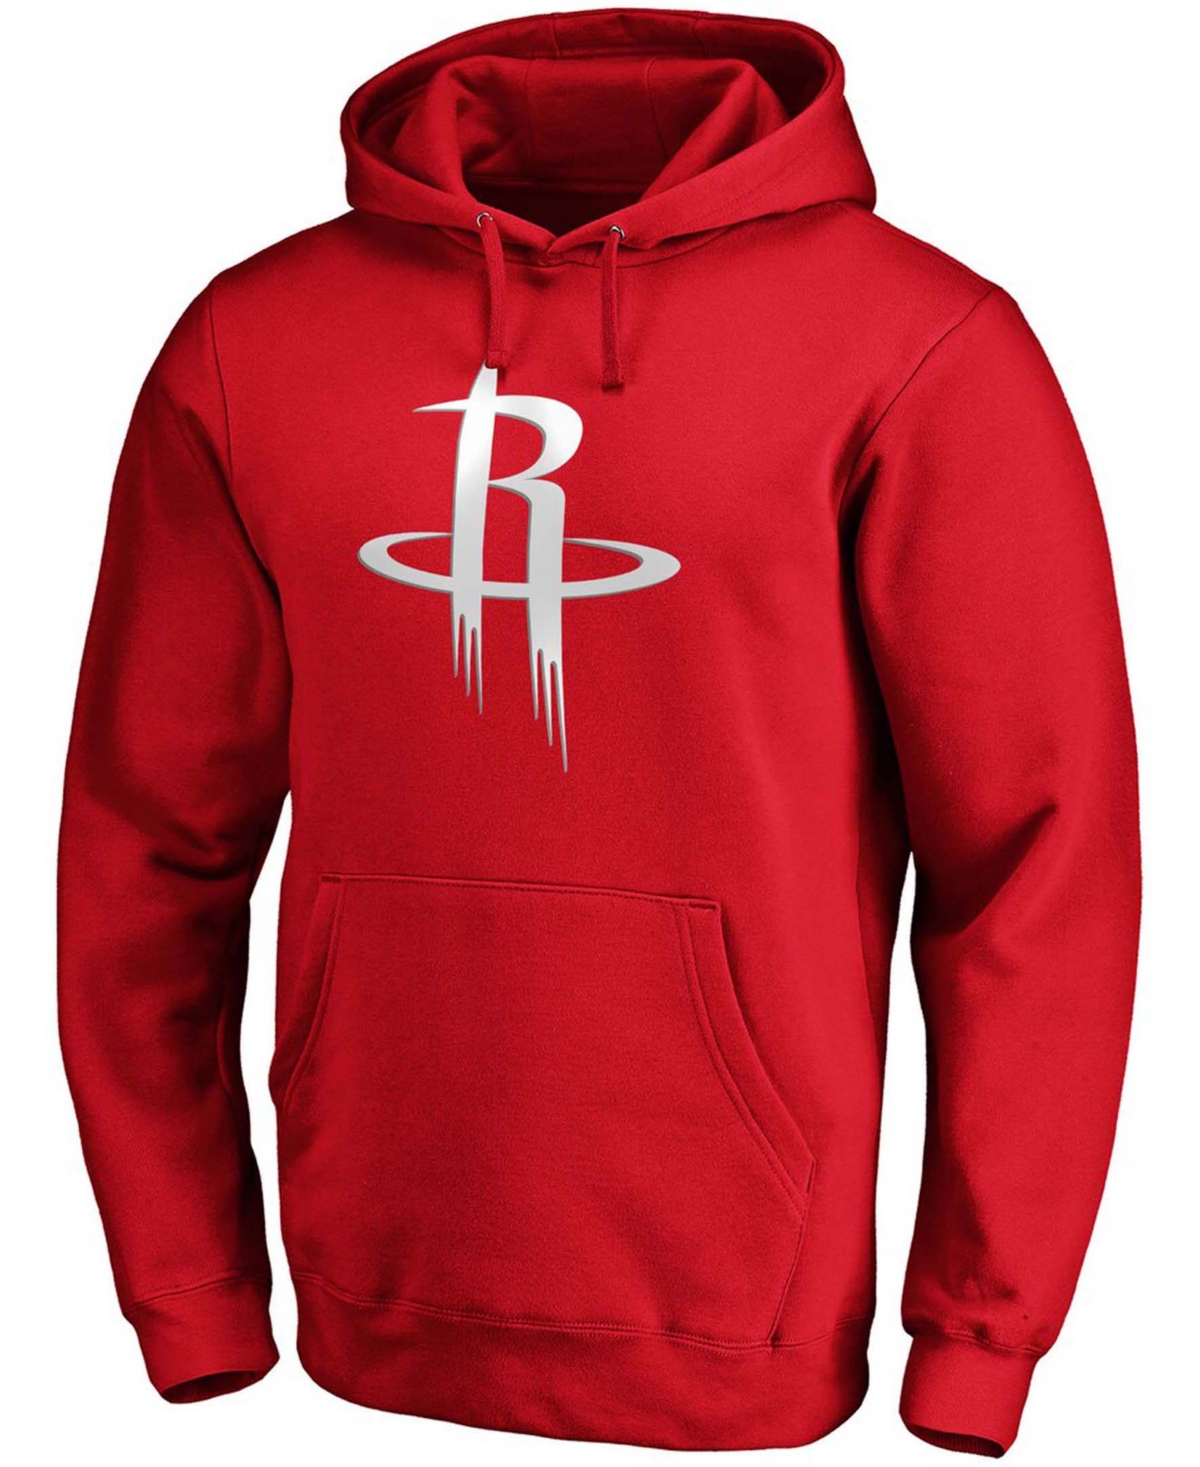 Shop Fanatics Men's Christian Wood Red Houston Rockets Playmaker Name And Number Pullover Hoodie